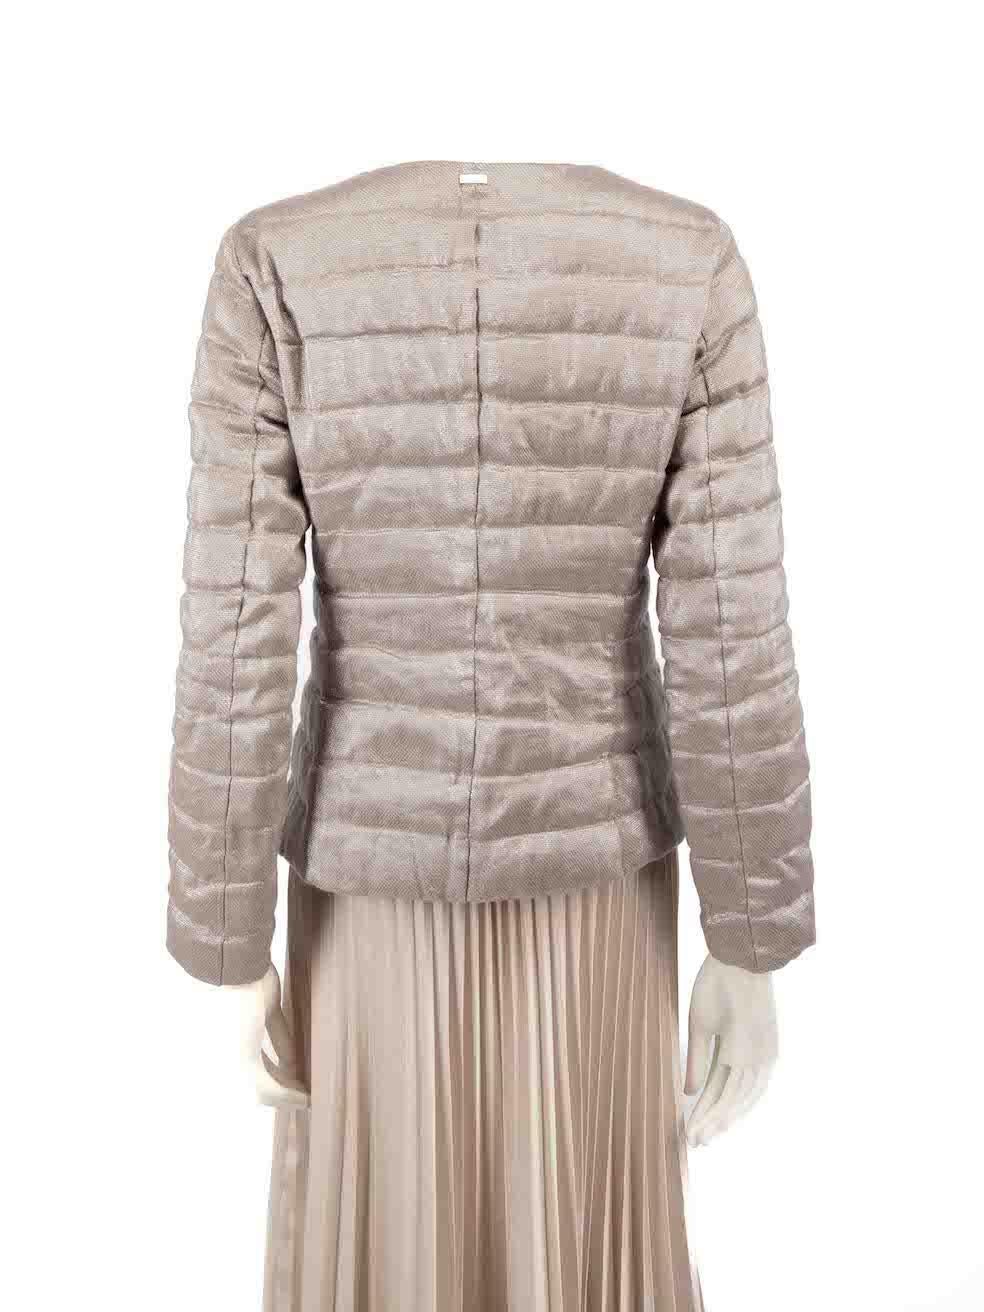 Herno Beige Metallic Accent Puffer Jacket Size M In Excellent Condition For Sale In London, GB